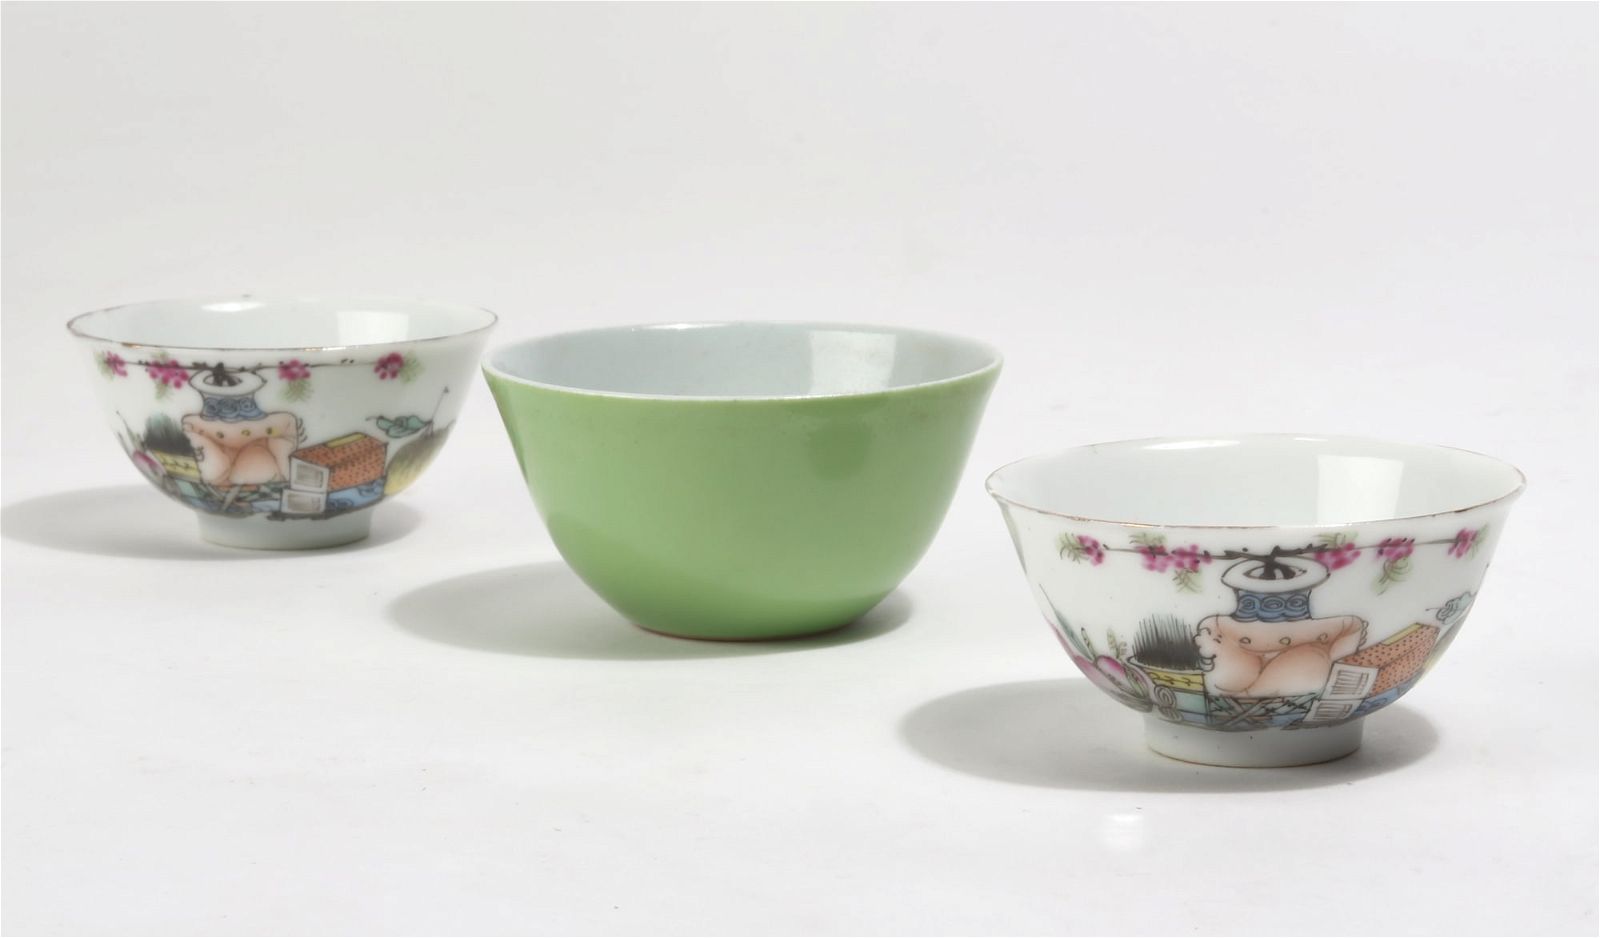 THREE SMALL CHINESE PORCELAIN CUPSThree